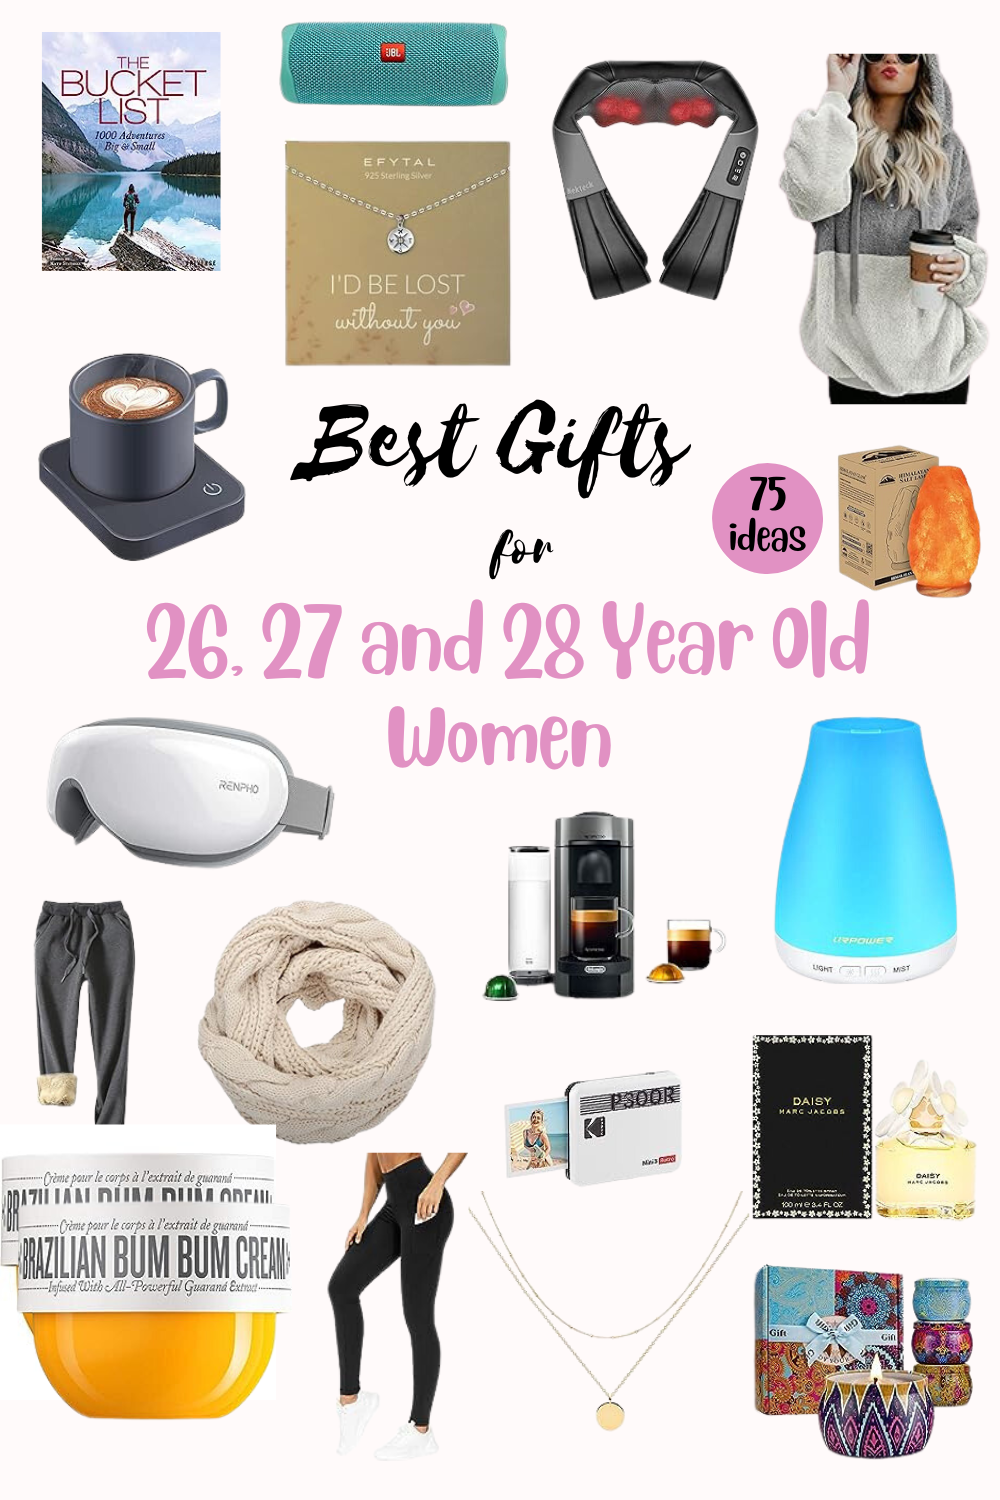 Gifts for 26, 27 and 28 year old women - Best Gifts For Women in